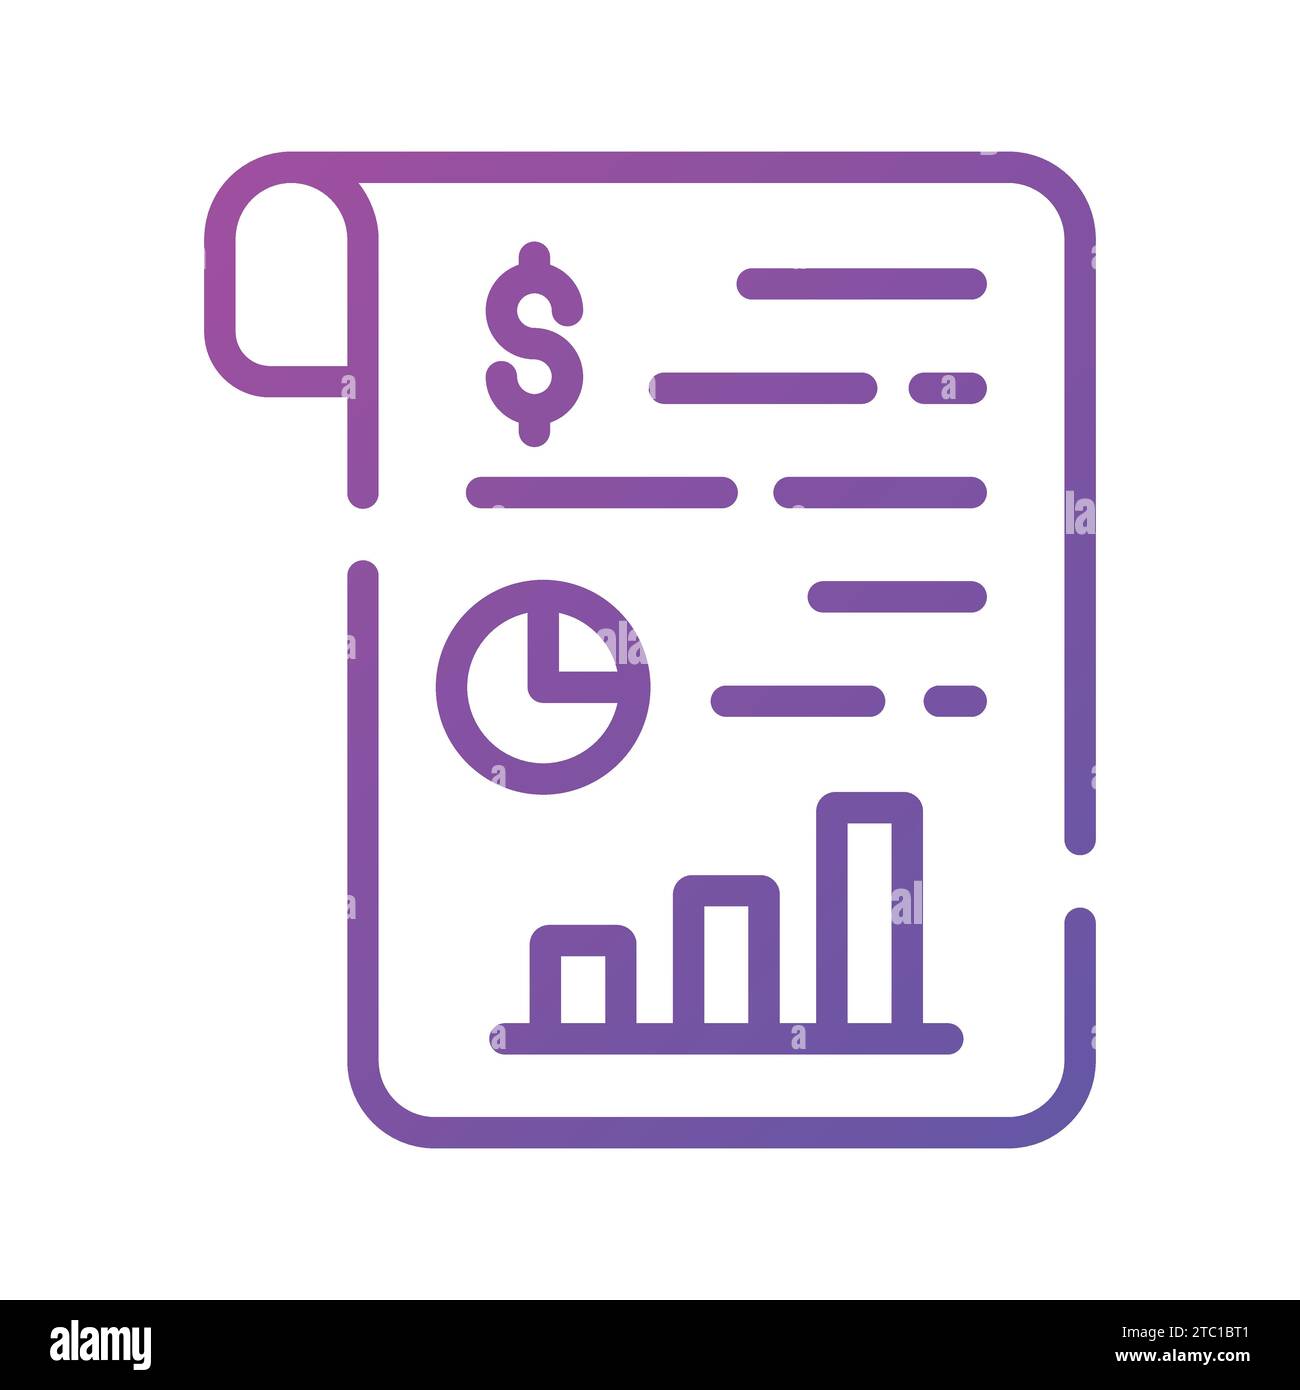 Check this beautifully designed icon of business report, statistics vector in flat style. Stock Vector